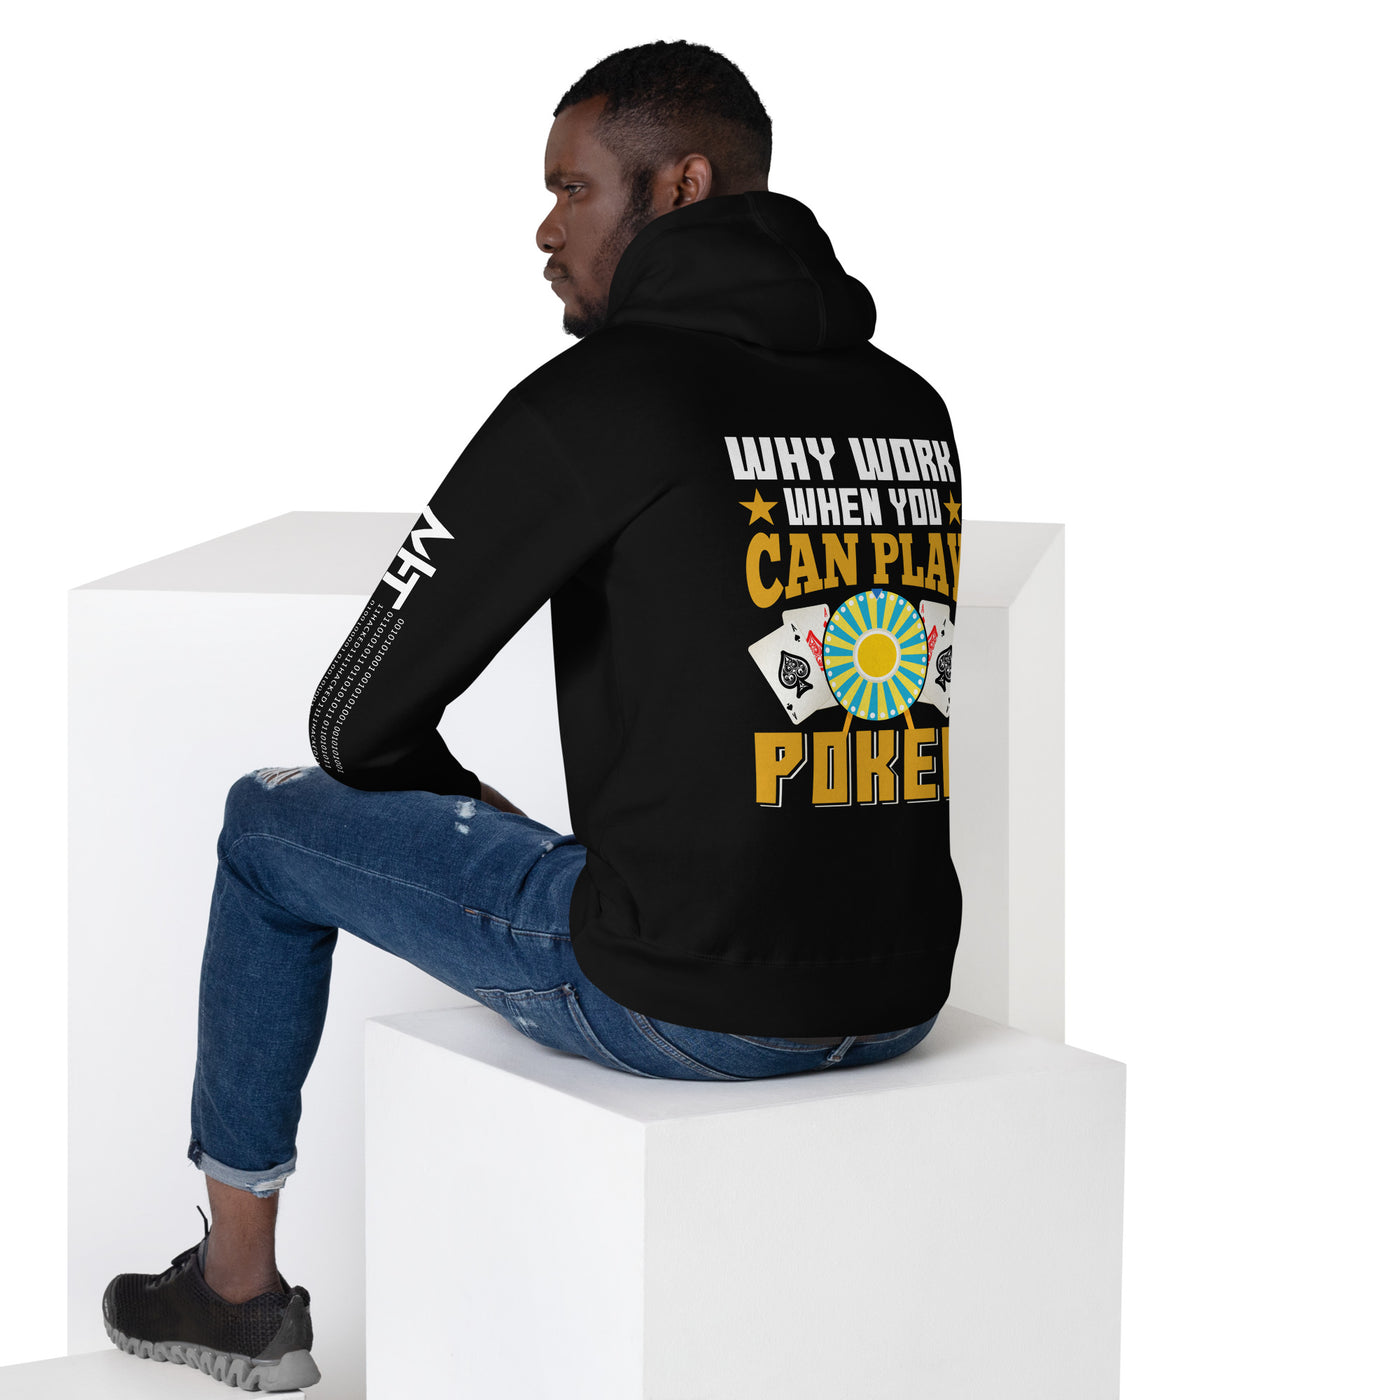 Why Work when you can Play Poker - Unisex Hoodie ( Back Print )